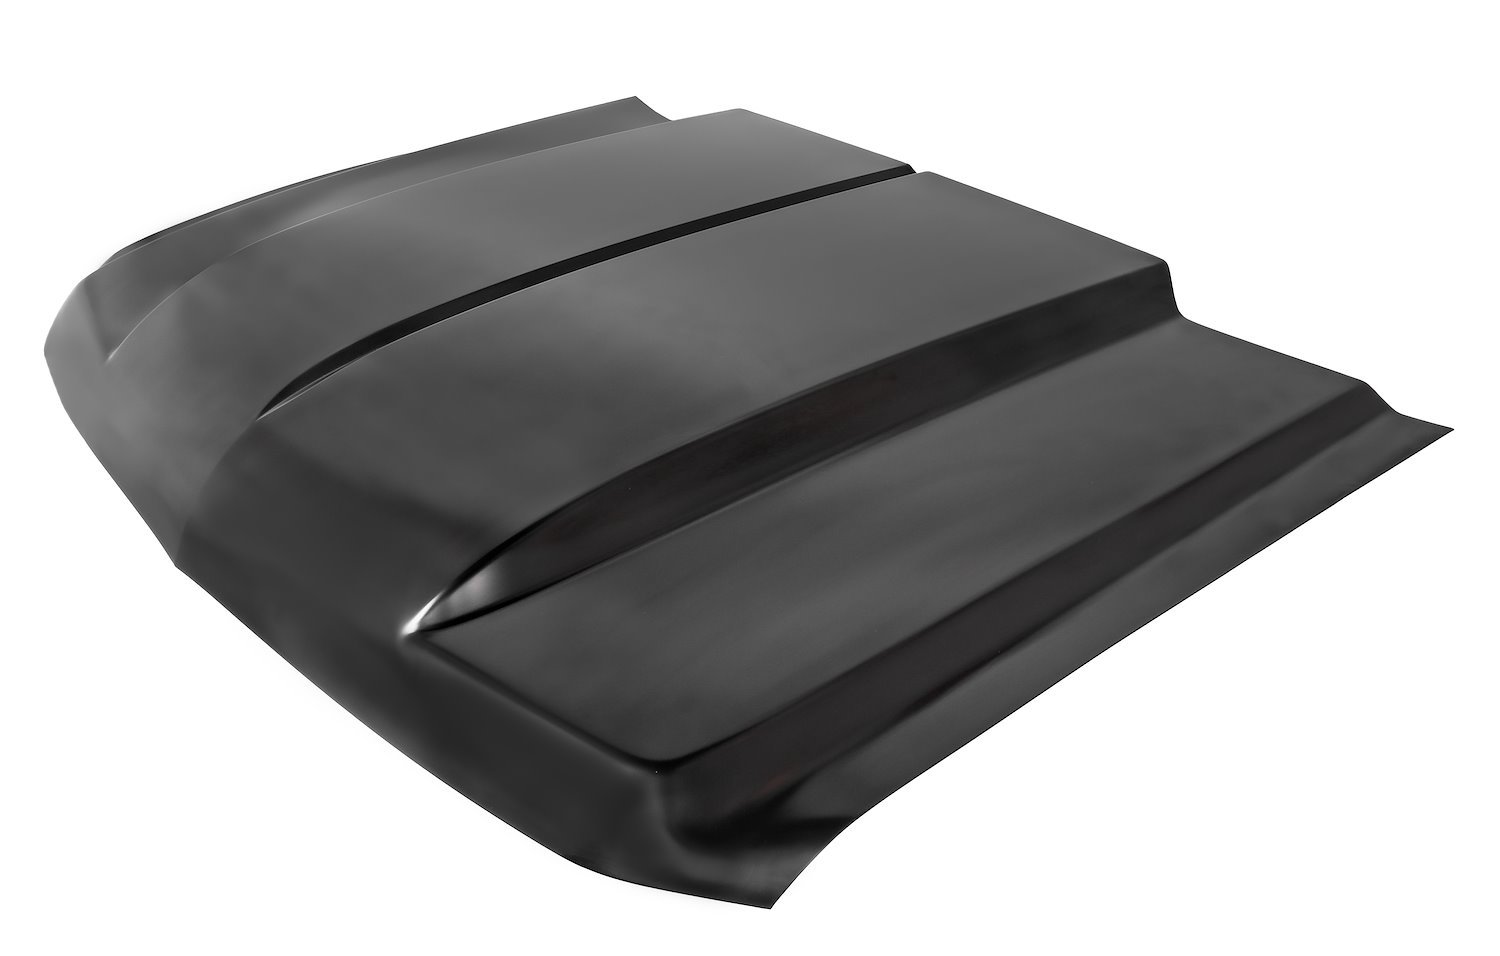 Cowl Induction Hood for Select 2007-2013 Chevrolet Trucks [Steel]